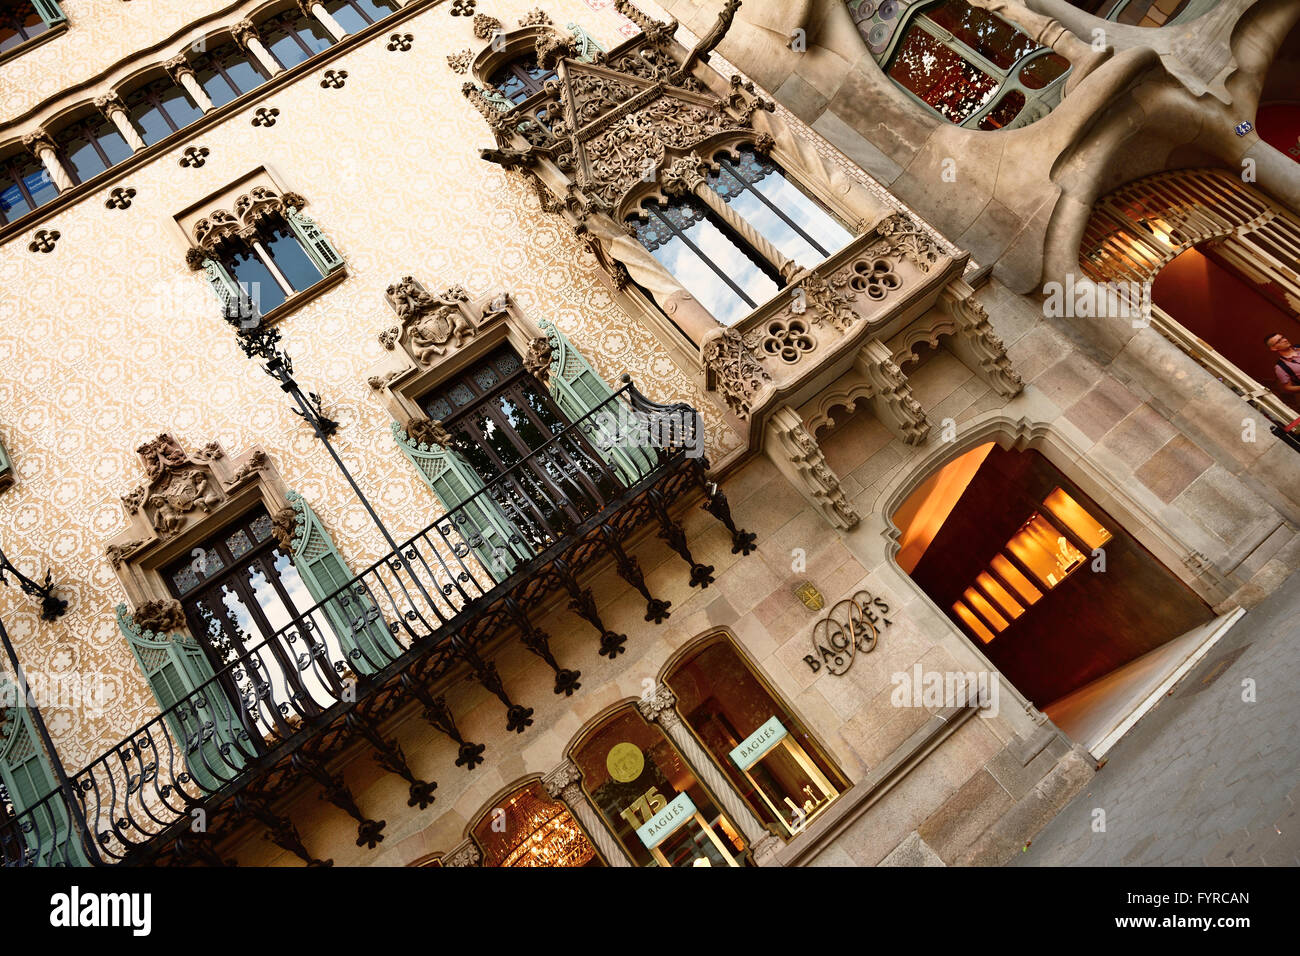 Casa Amatller is a building in the Modernisme style in Barcelona, designed by Josep Puig i Cadafalch. Barcelona, Catalonia Stock Photo